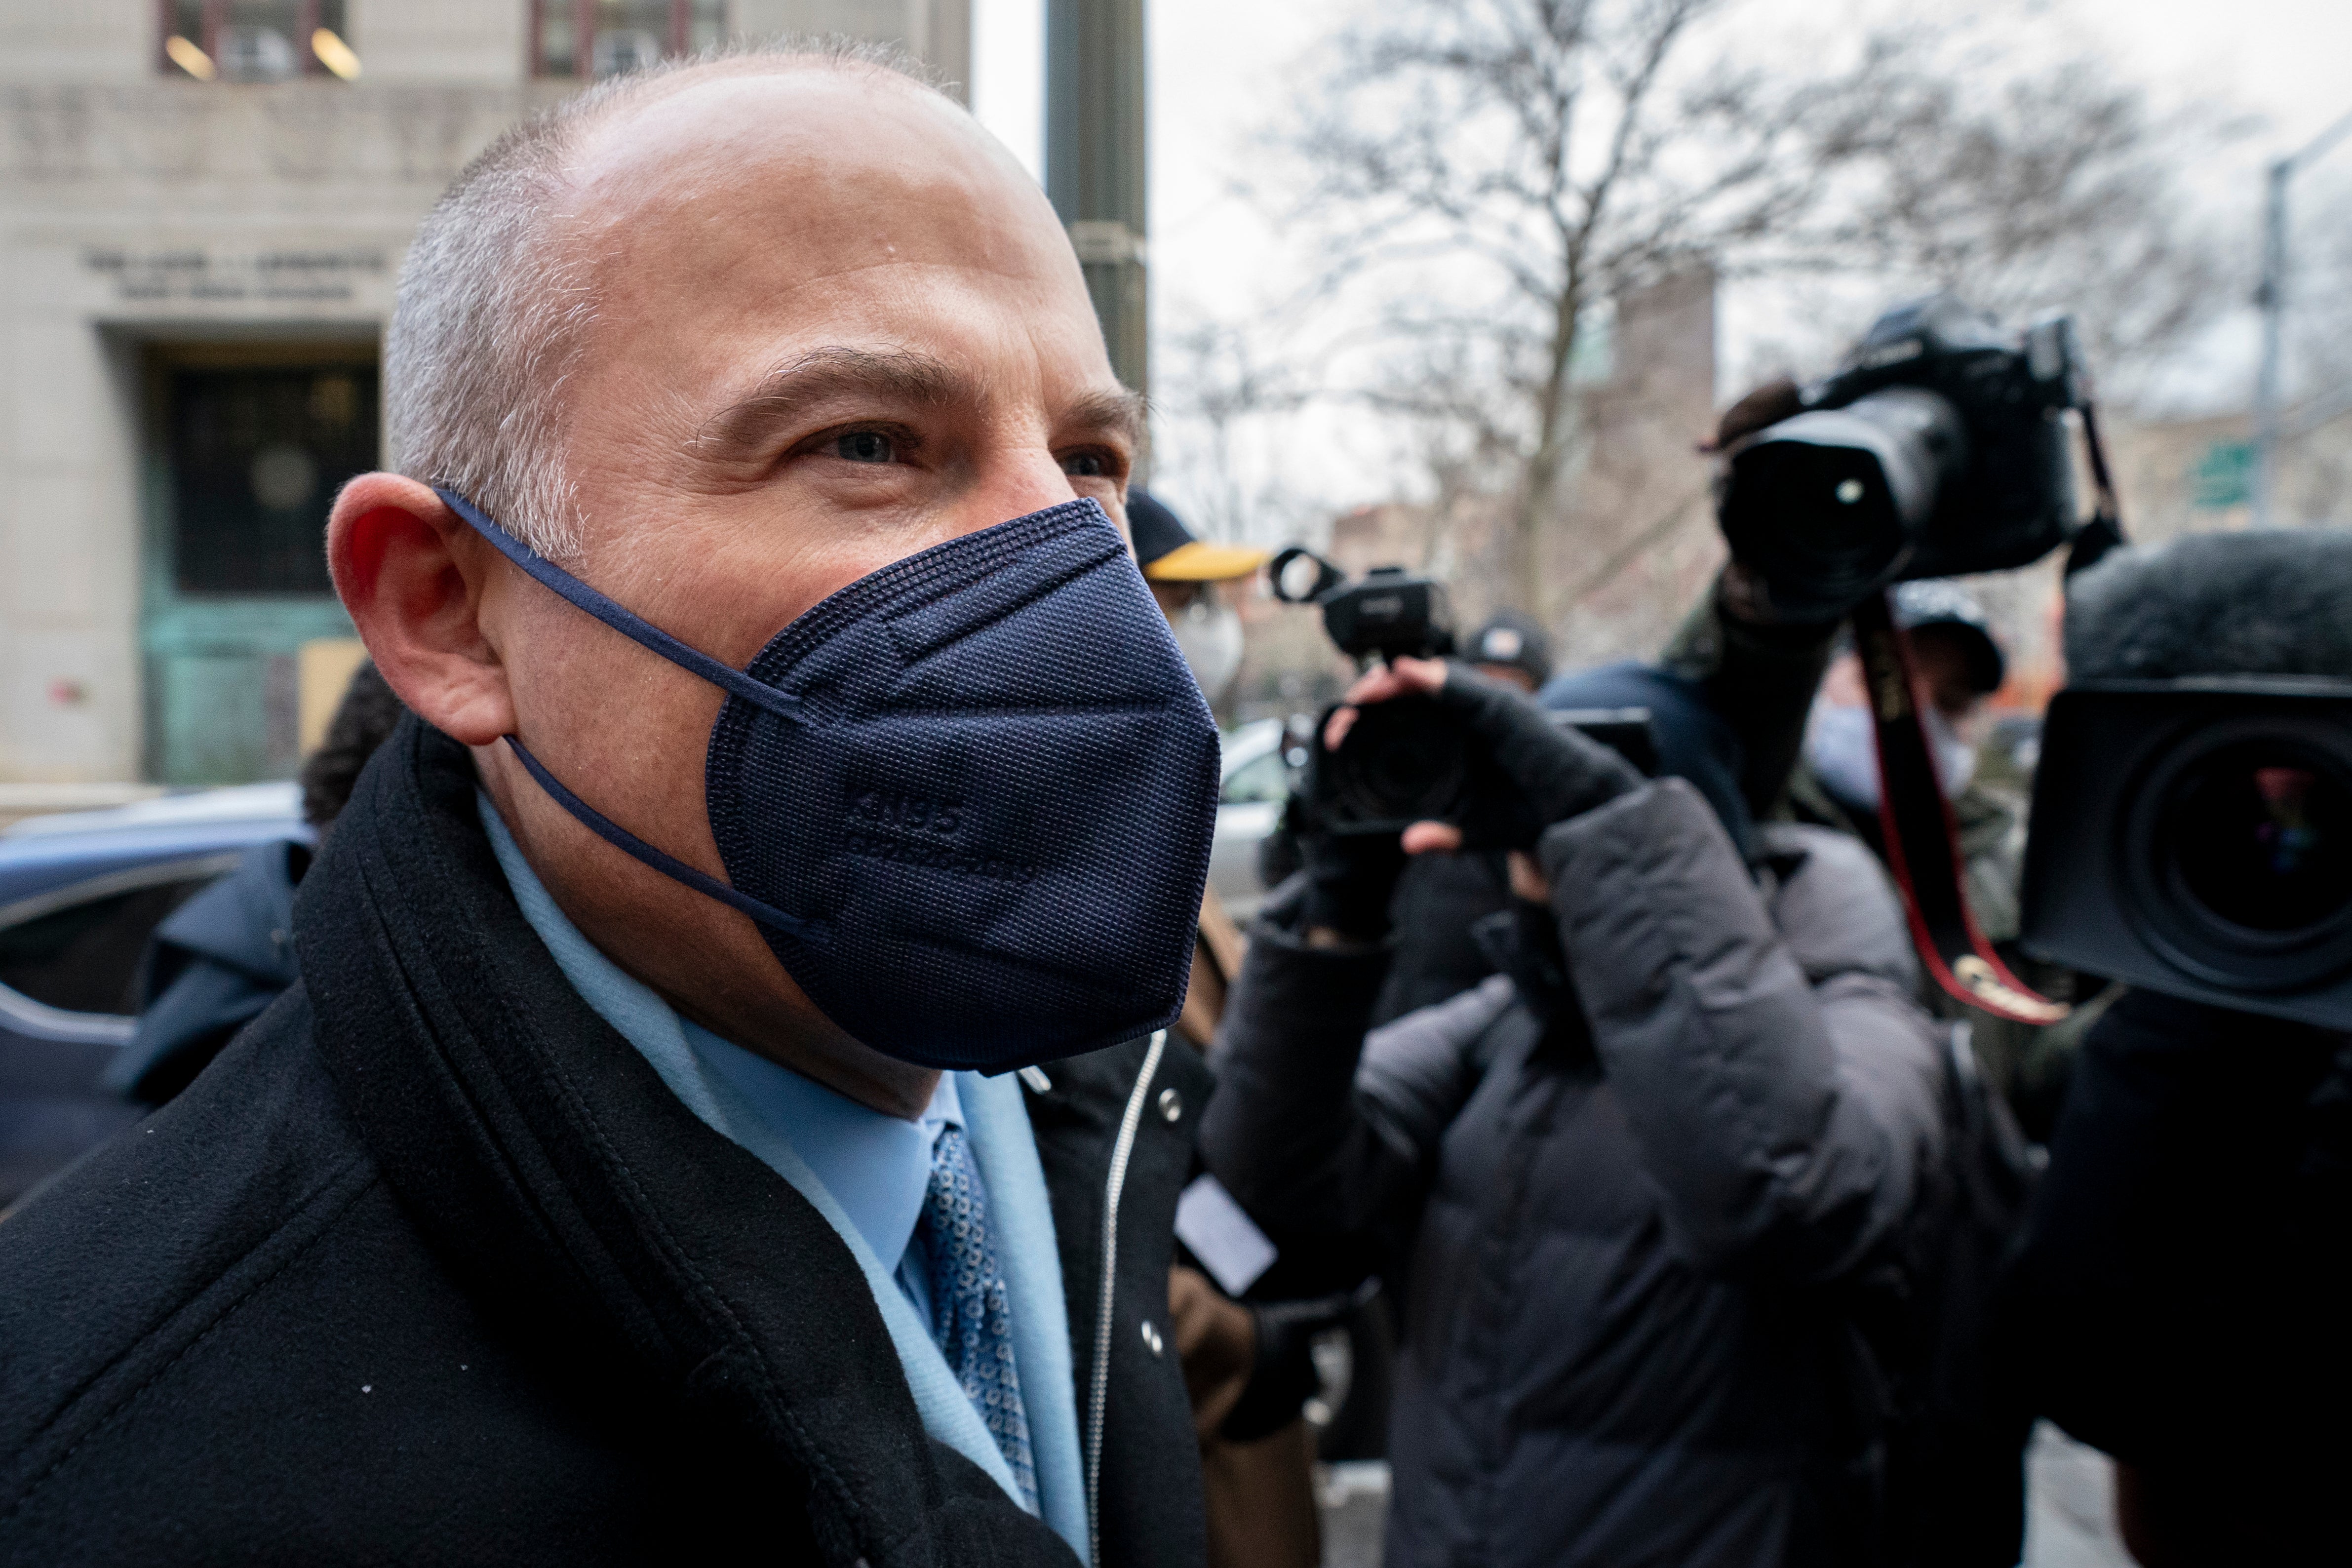 Michael Avenatti arrives in court this week ahead of the start of his wire fraud trial